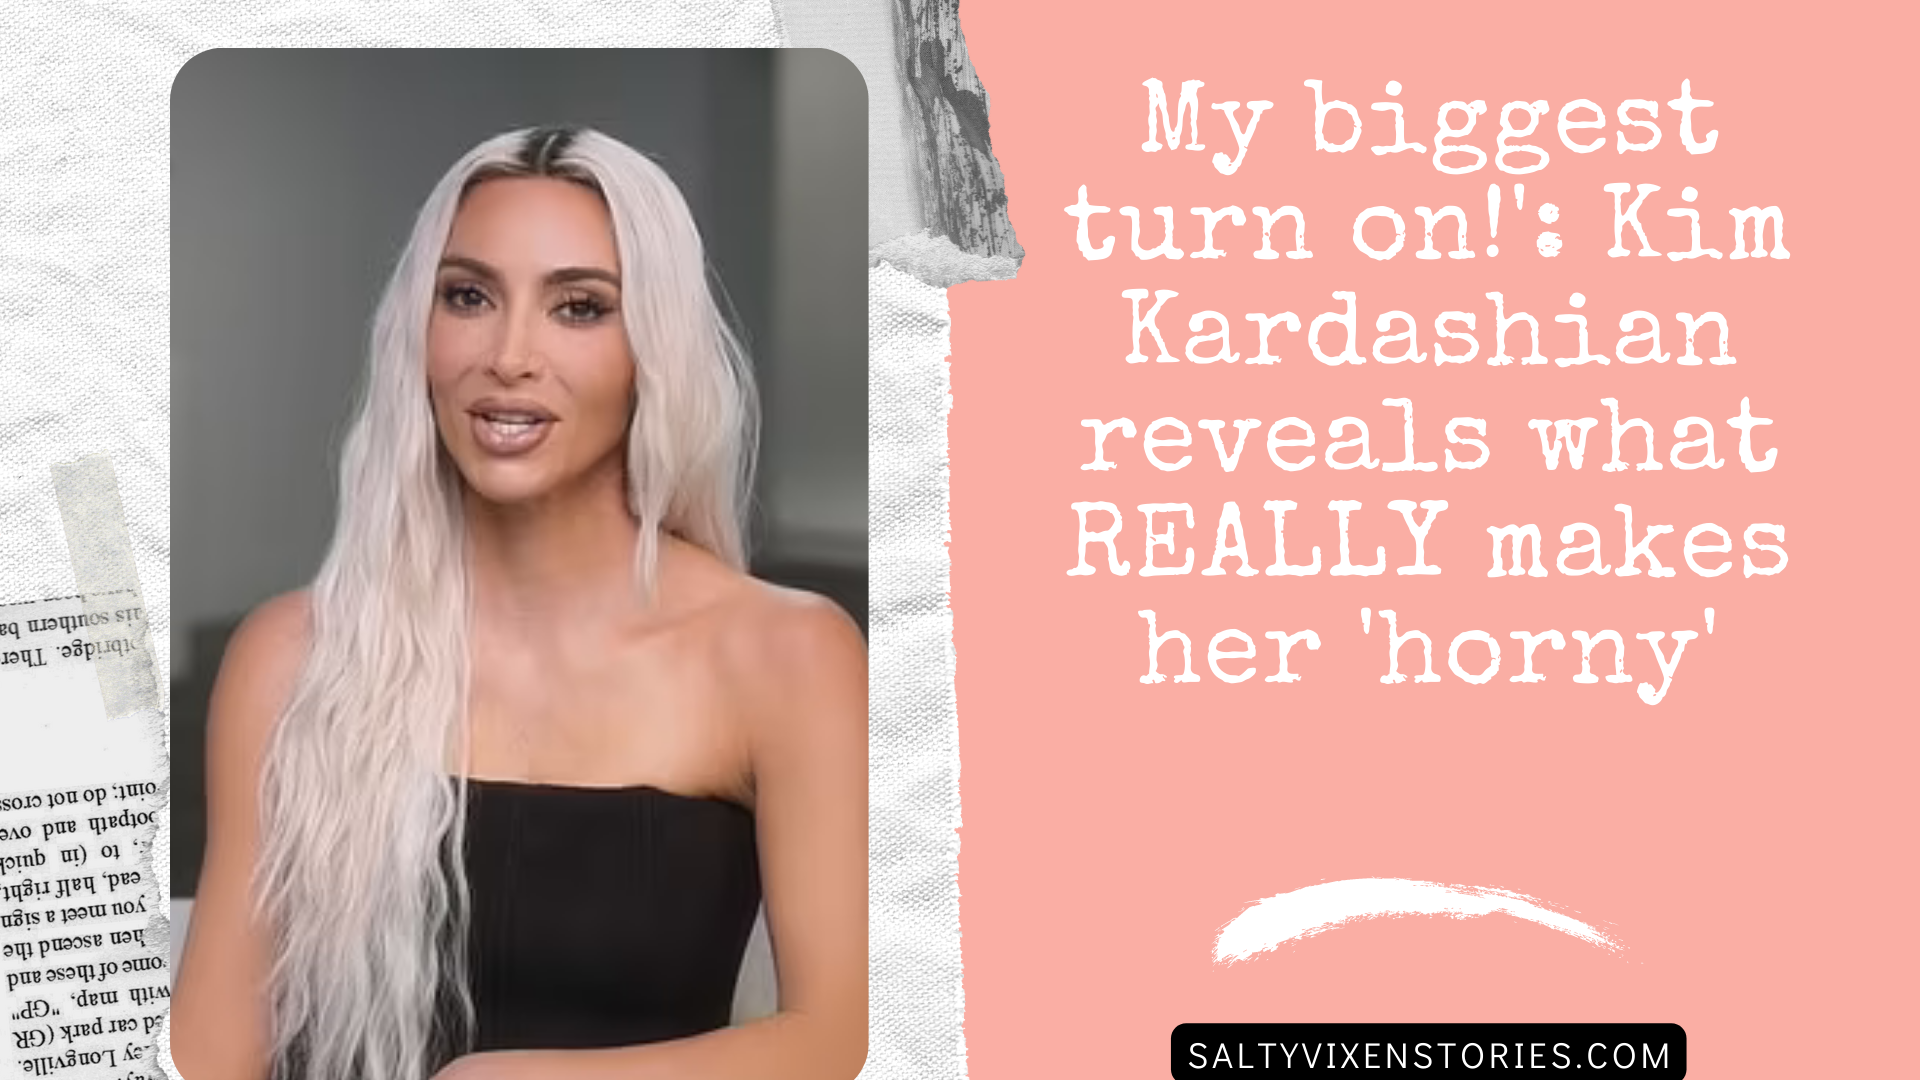 My biggest turn on!’: Kim Kardashian reveals what REALLY makes her ‘horny’